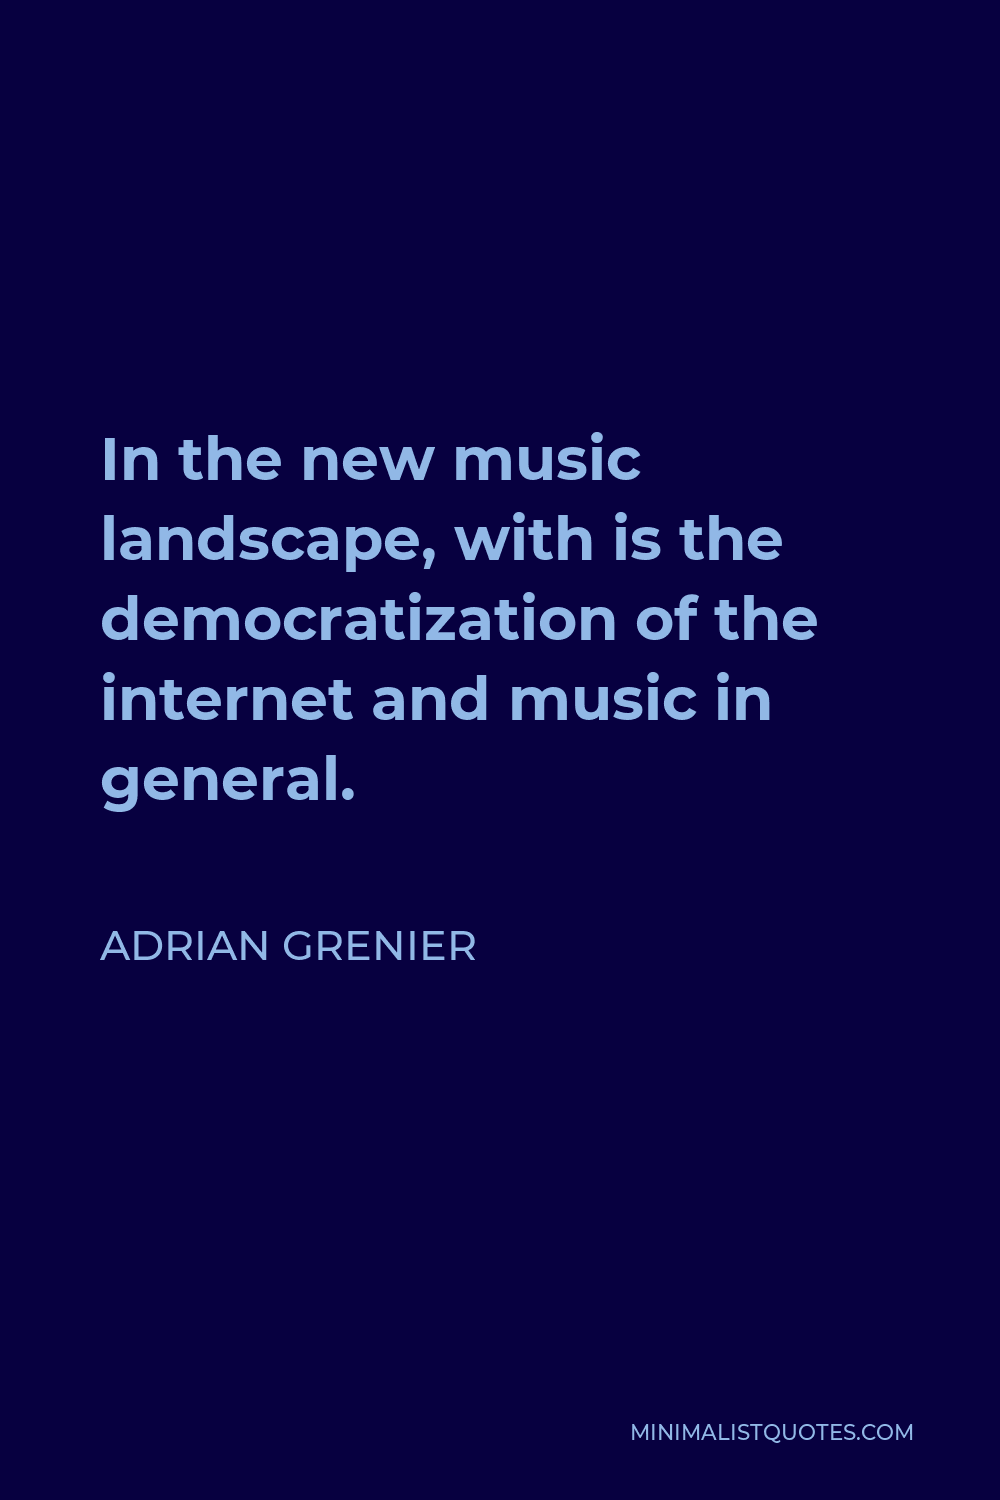 Adrian Grenier Quote - In the new music landscape, with is the democratization of the internet and music in general.